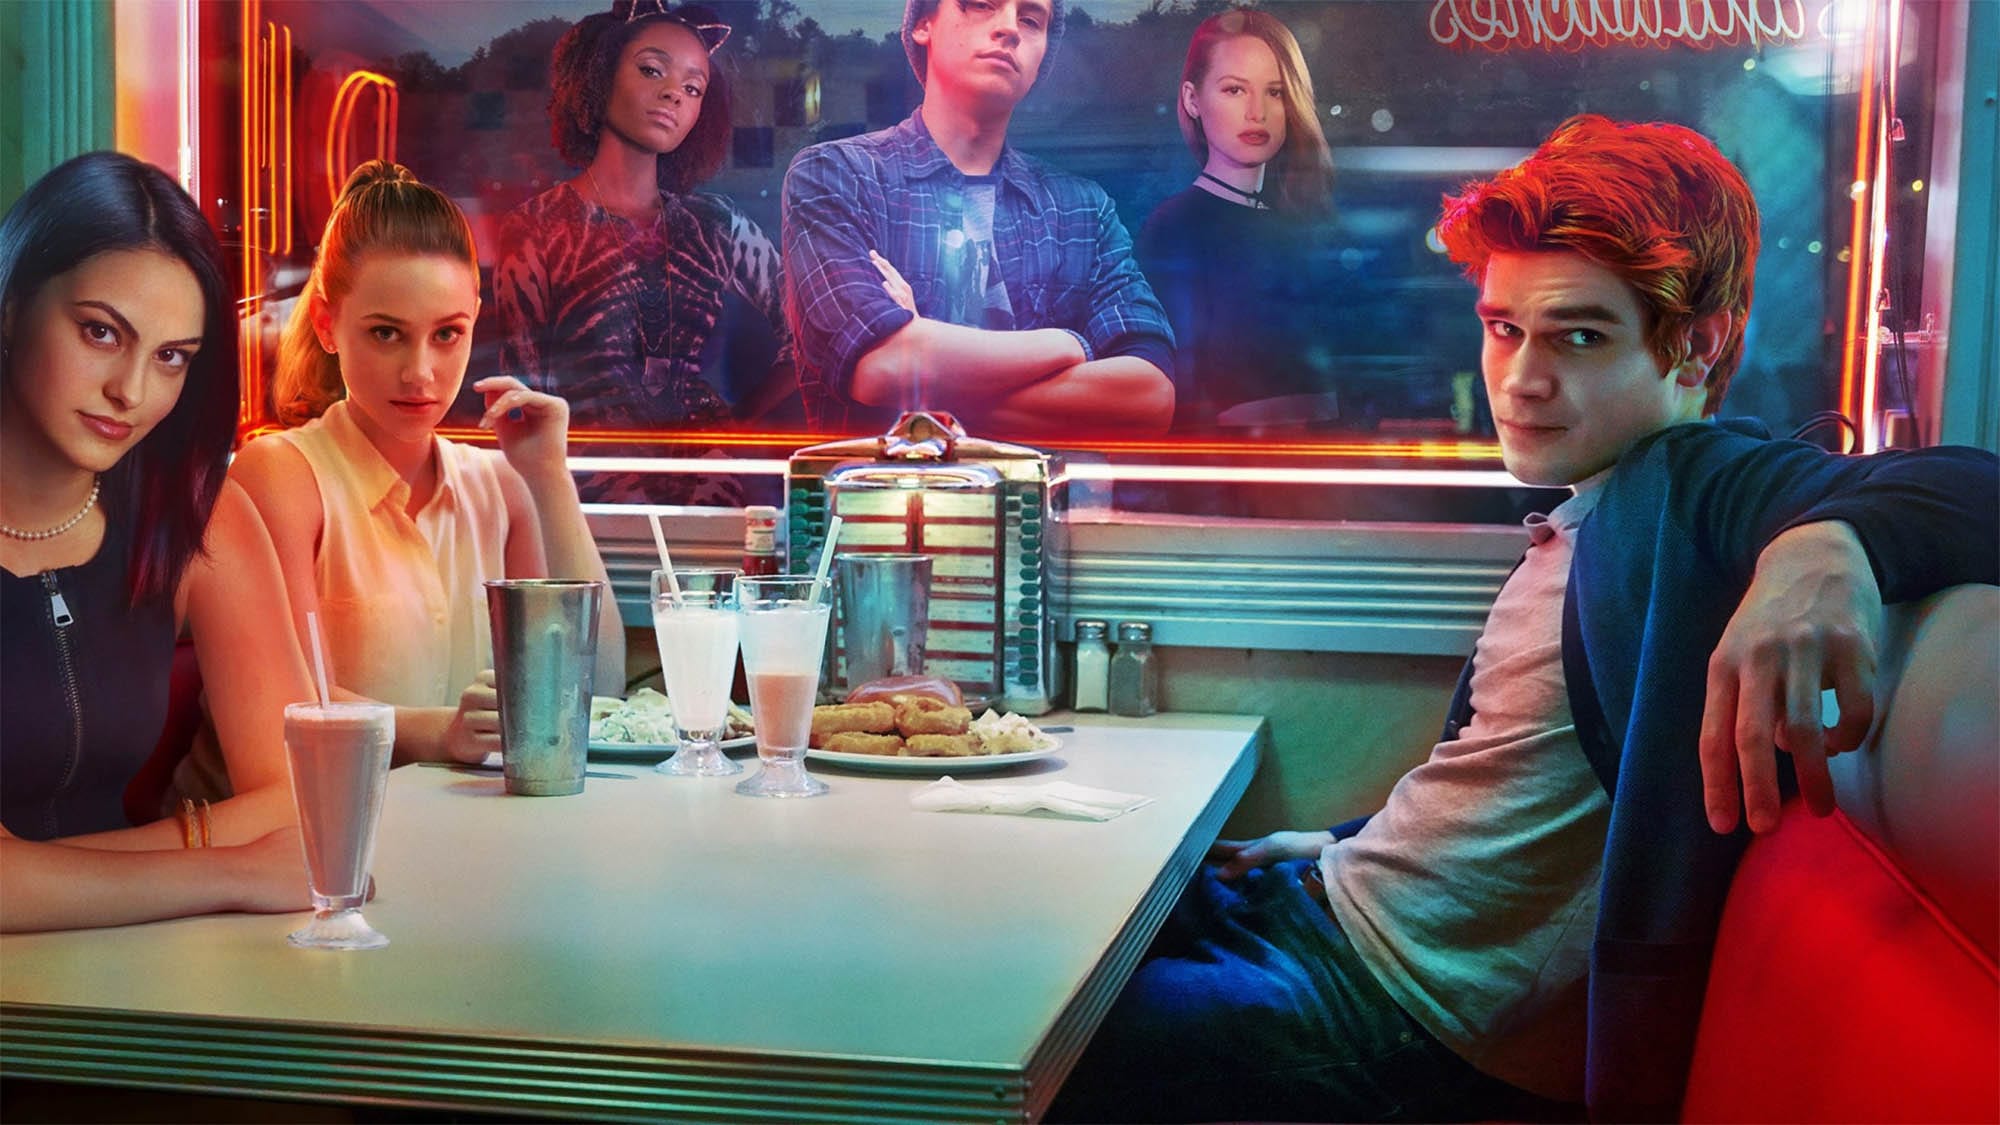 Roberto Aguirre-Sacasa’s 'Riverdale' features loving tributes to 'Twin Peaks' that make it a strange reflection of the iconic 90s hit.